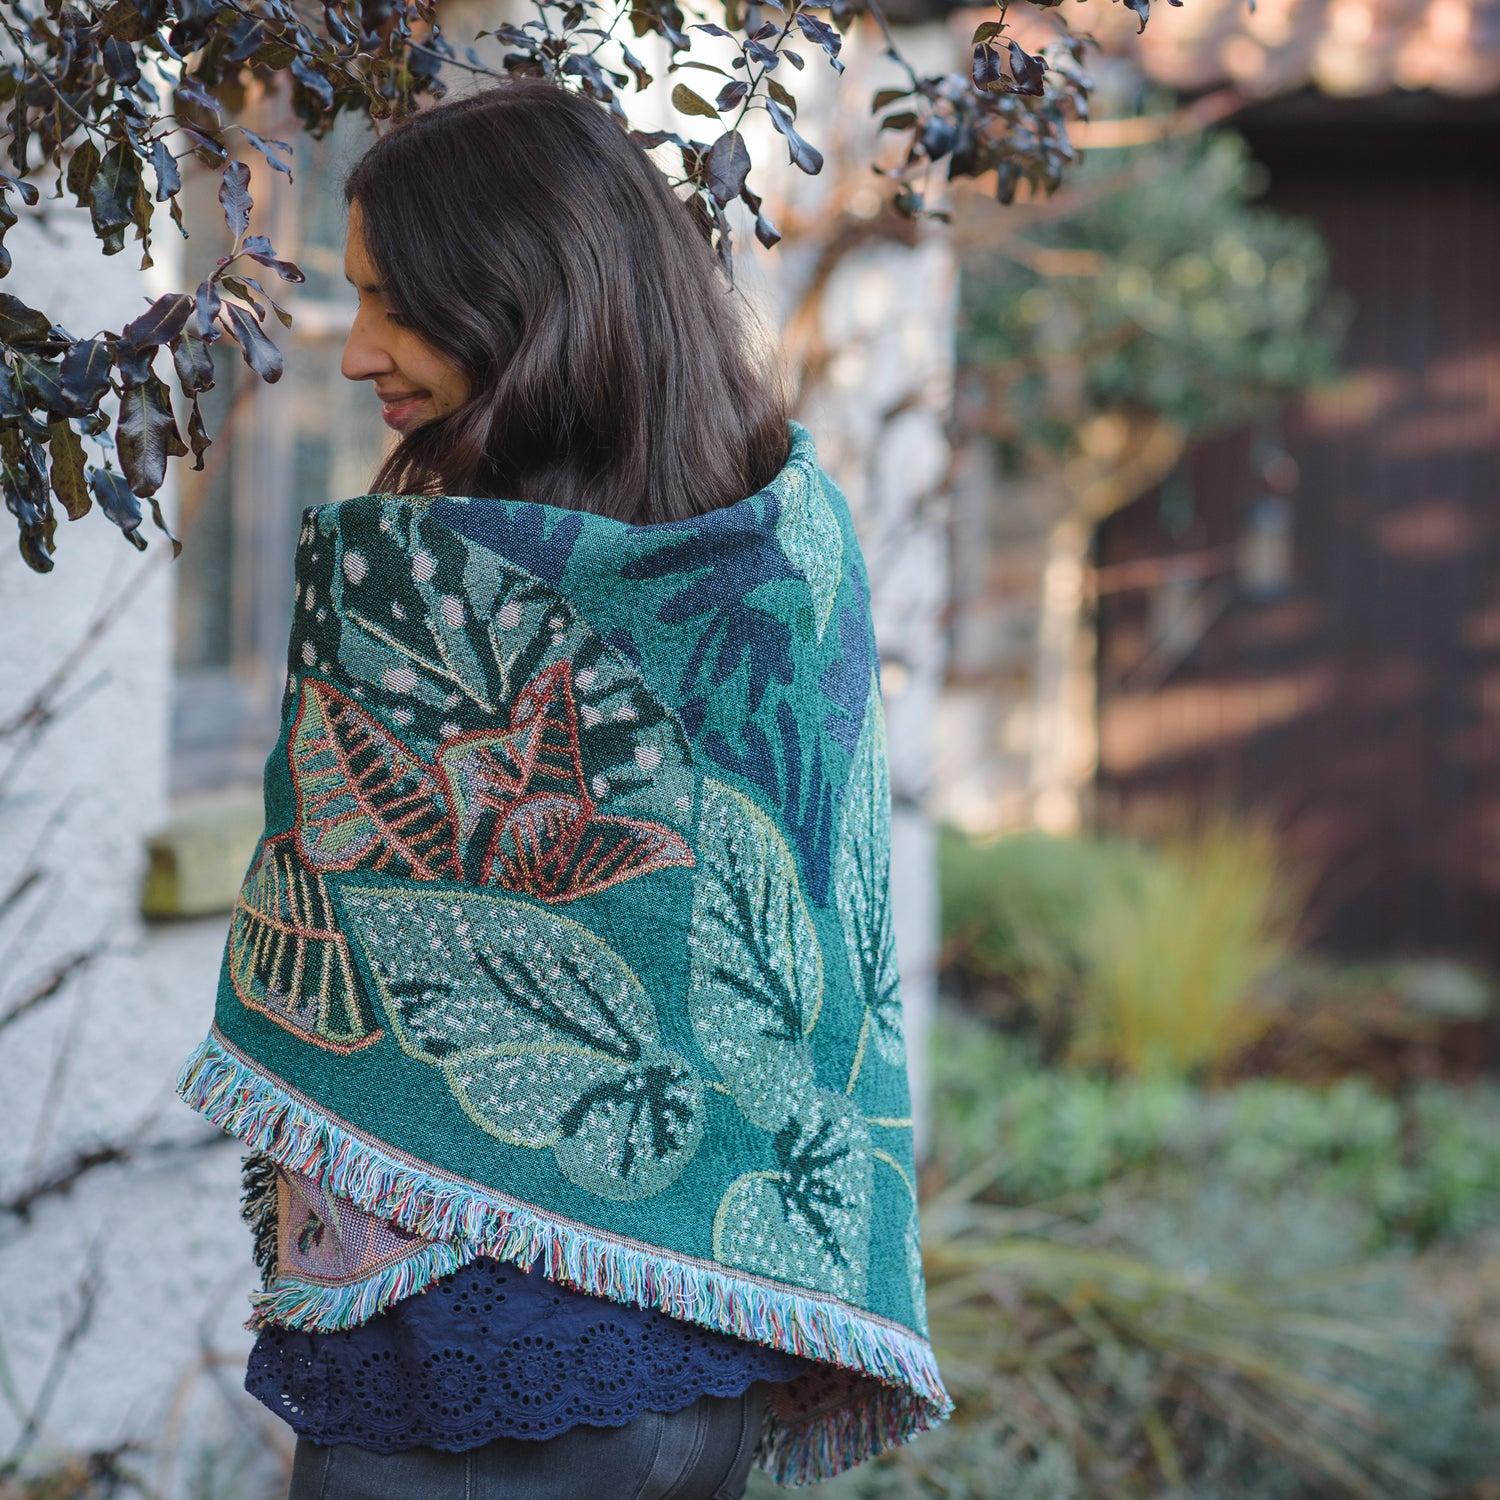 woven wrap blanket with fringe wrapped around womans shoulders in winter garden